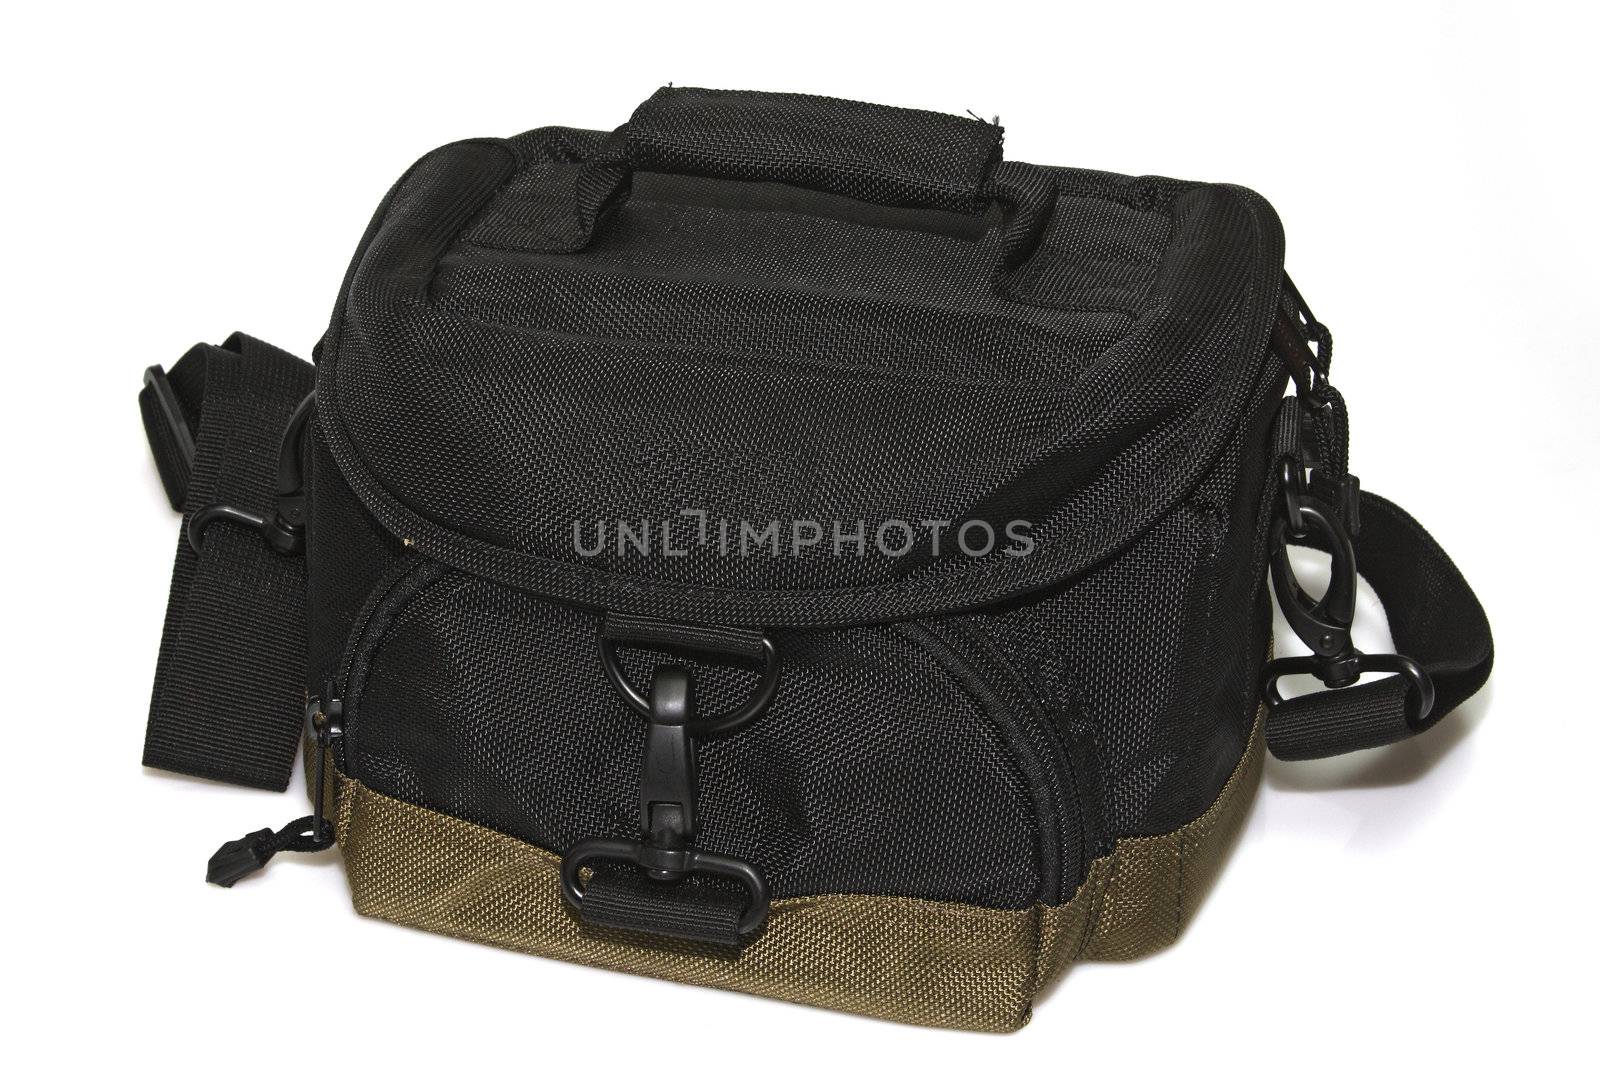 Photo bag on a white background